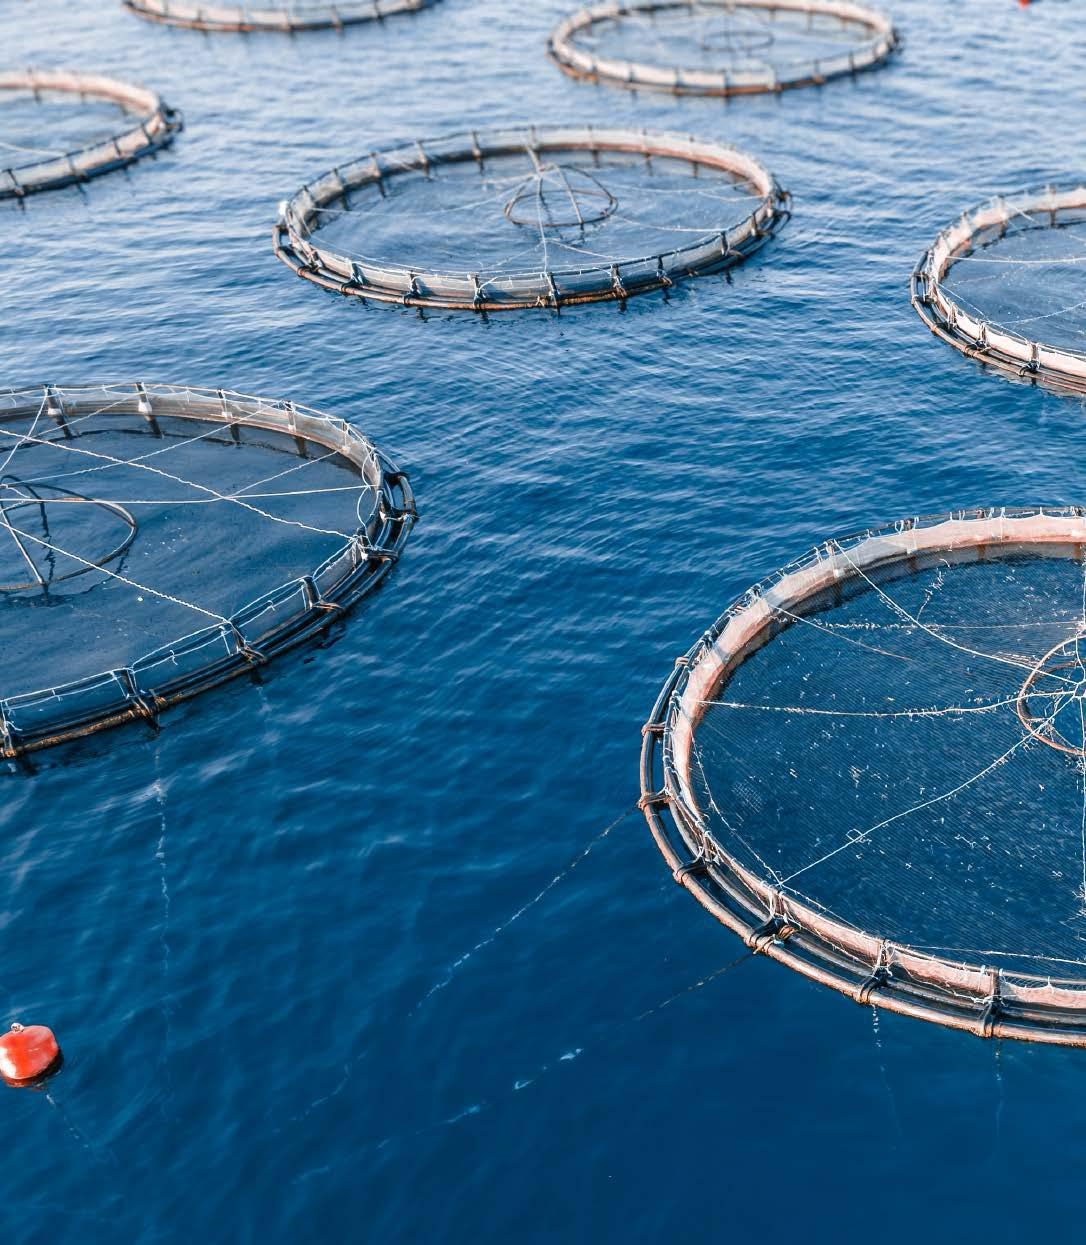 aquaculture industry in the United States